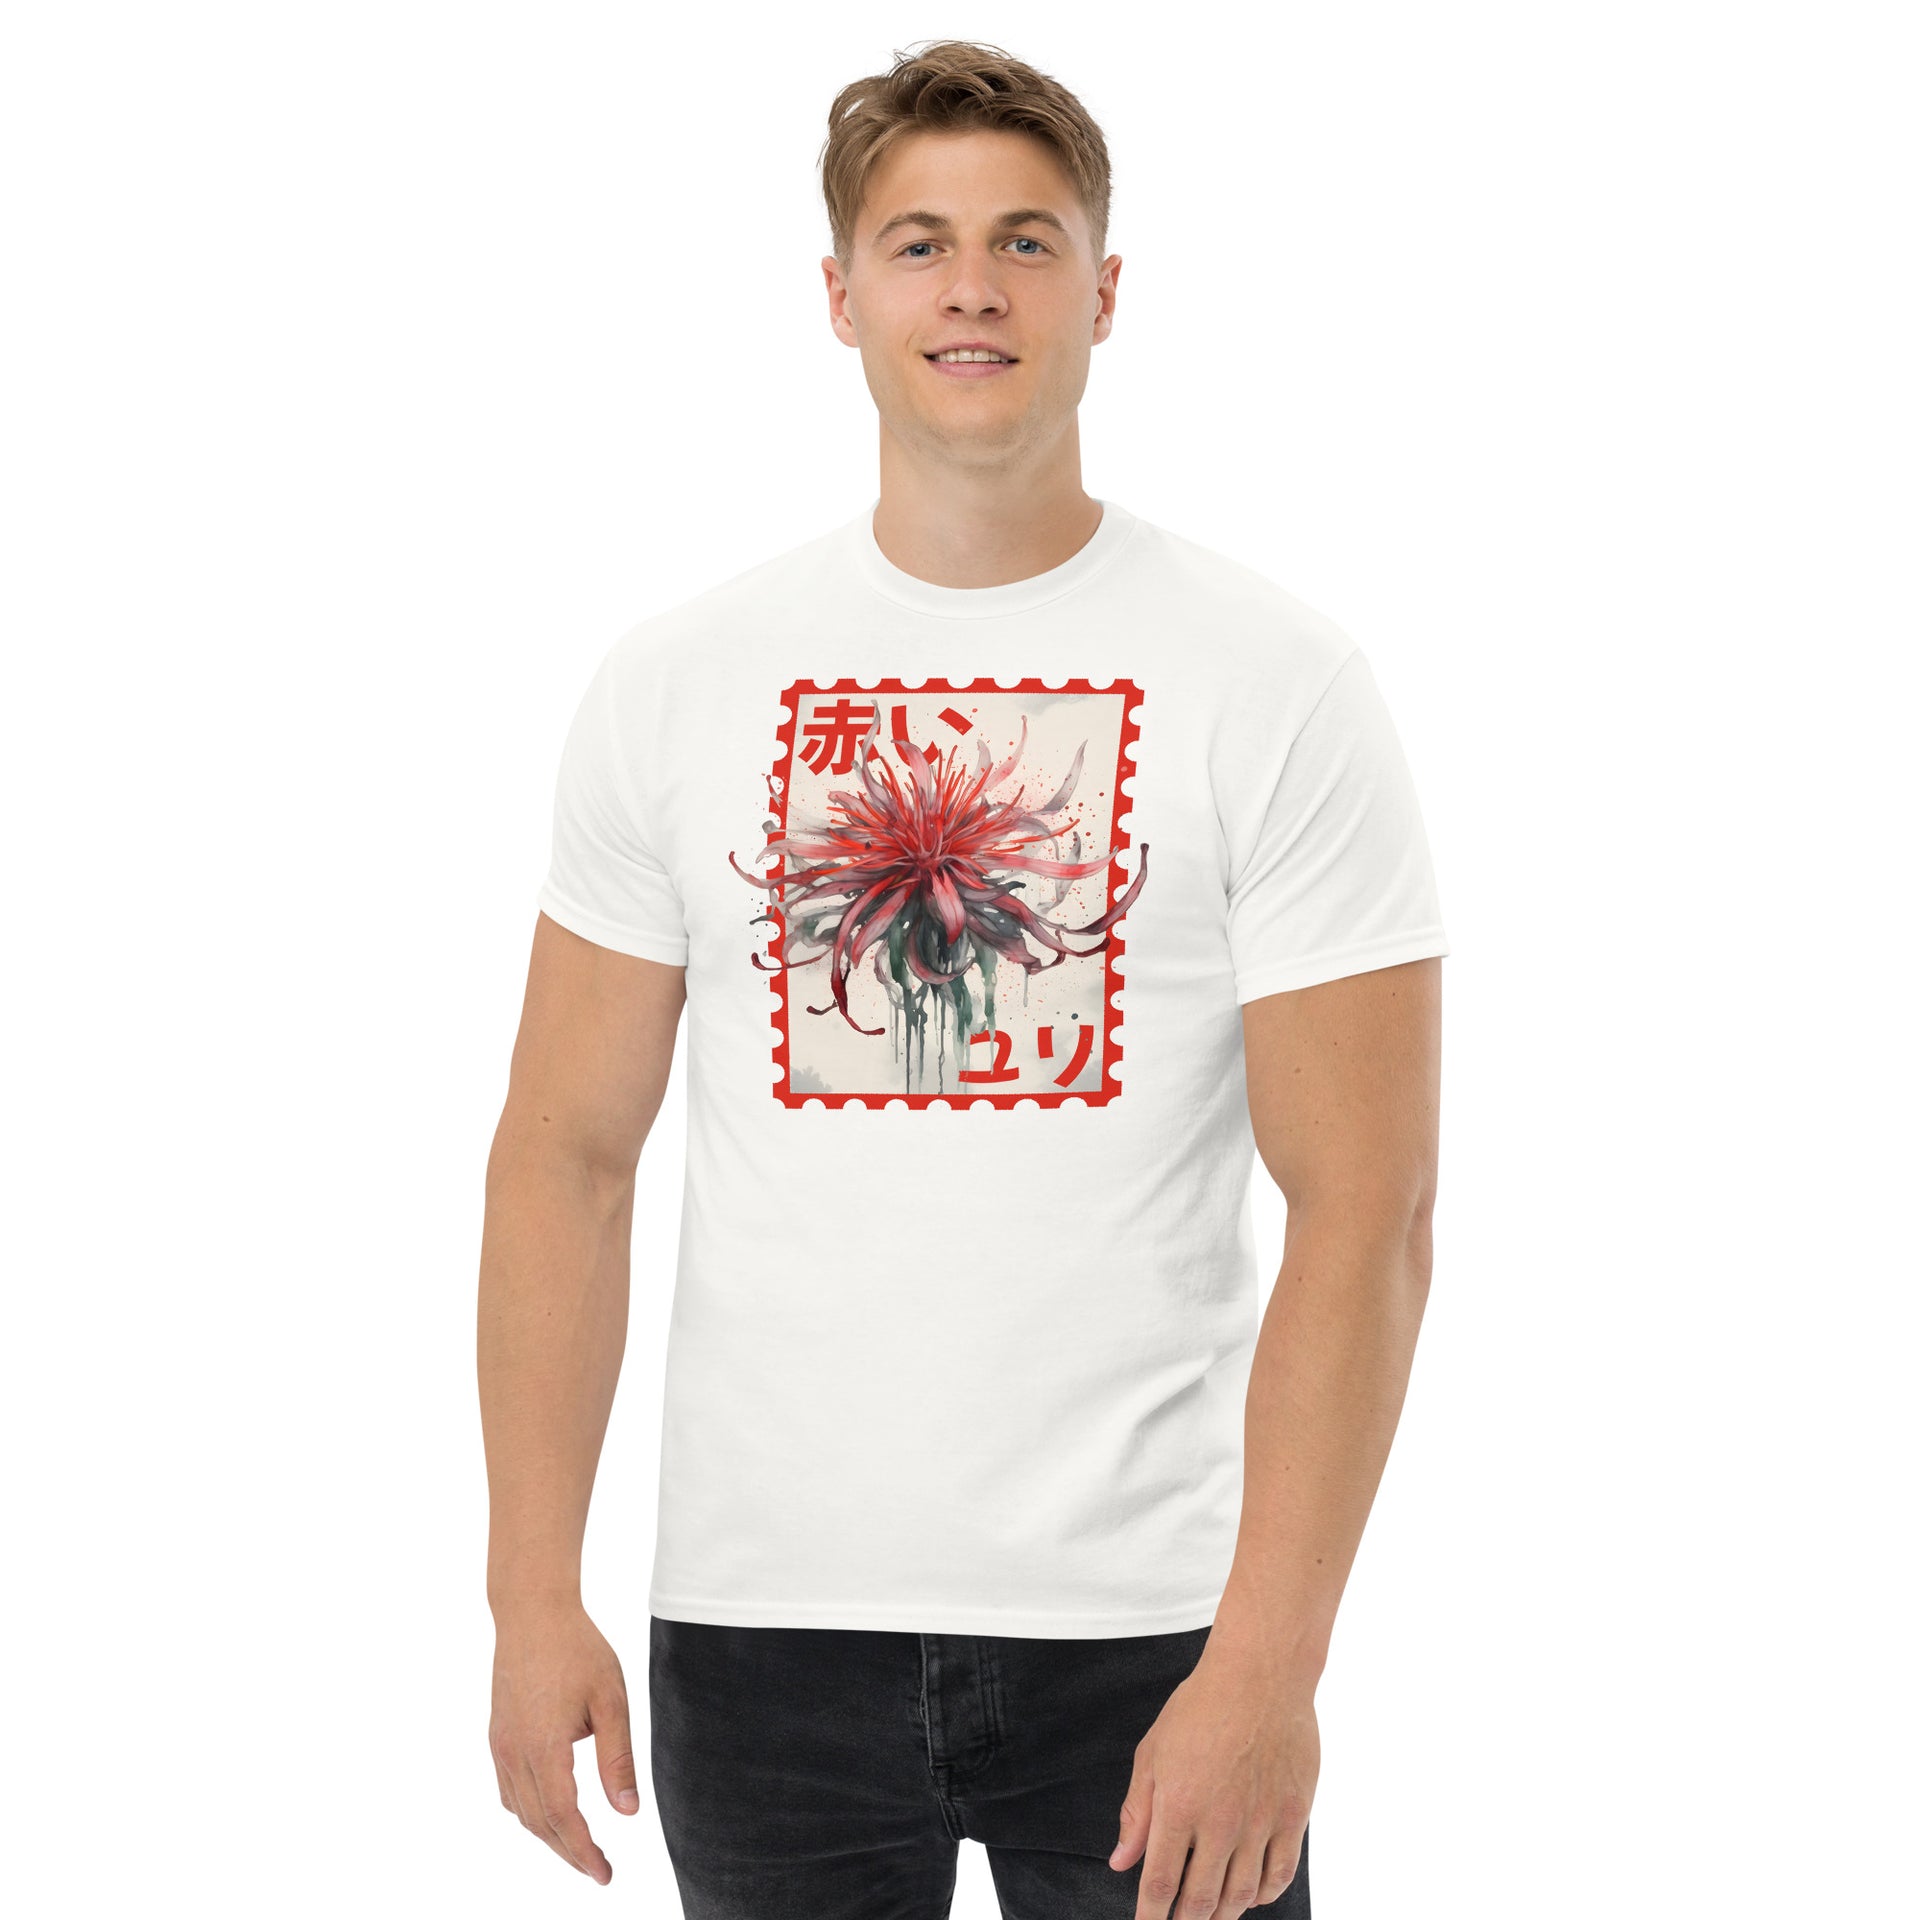 Japanese Red Spider Lily Men's T-Shirt